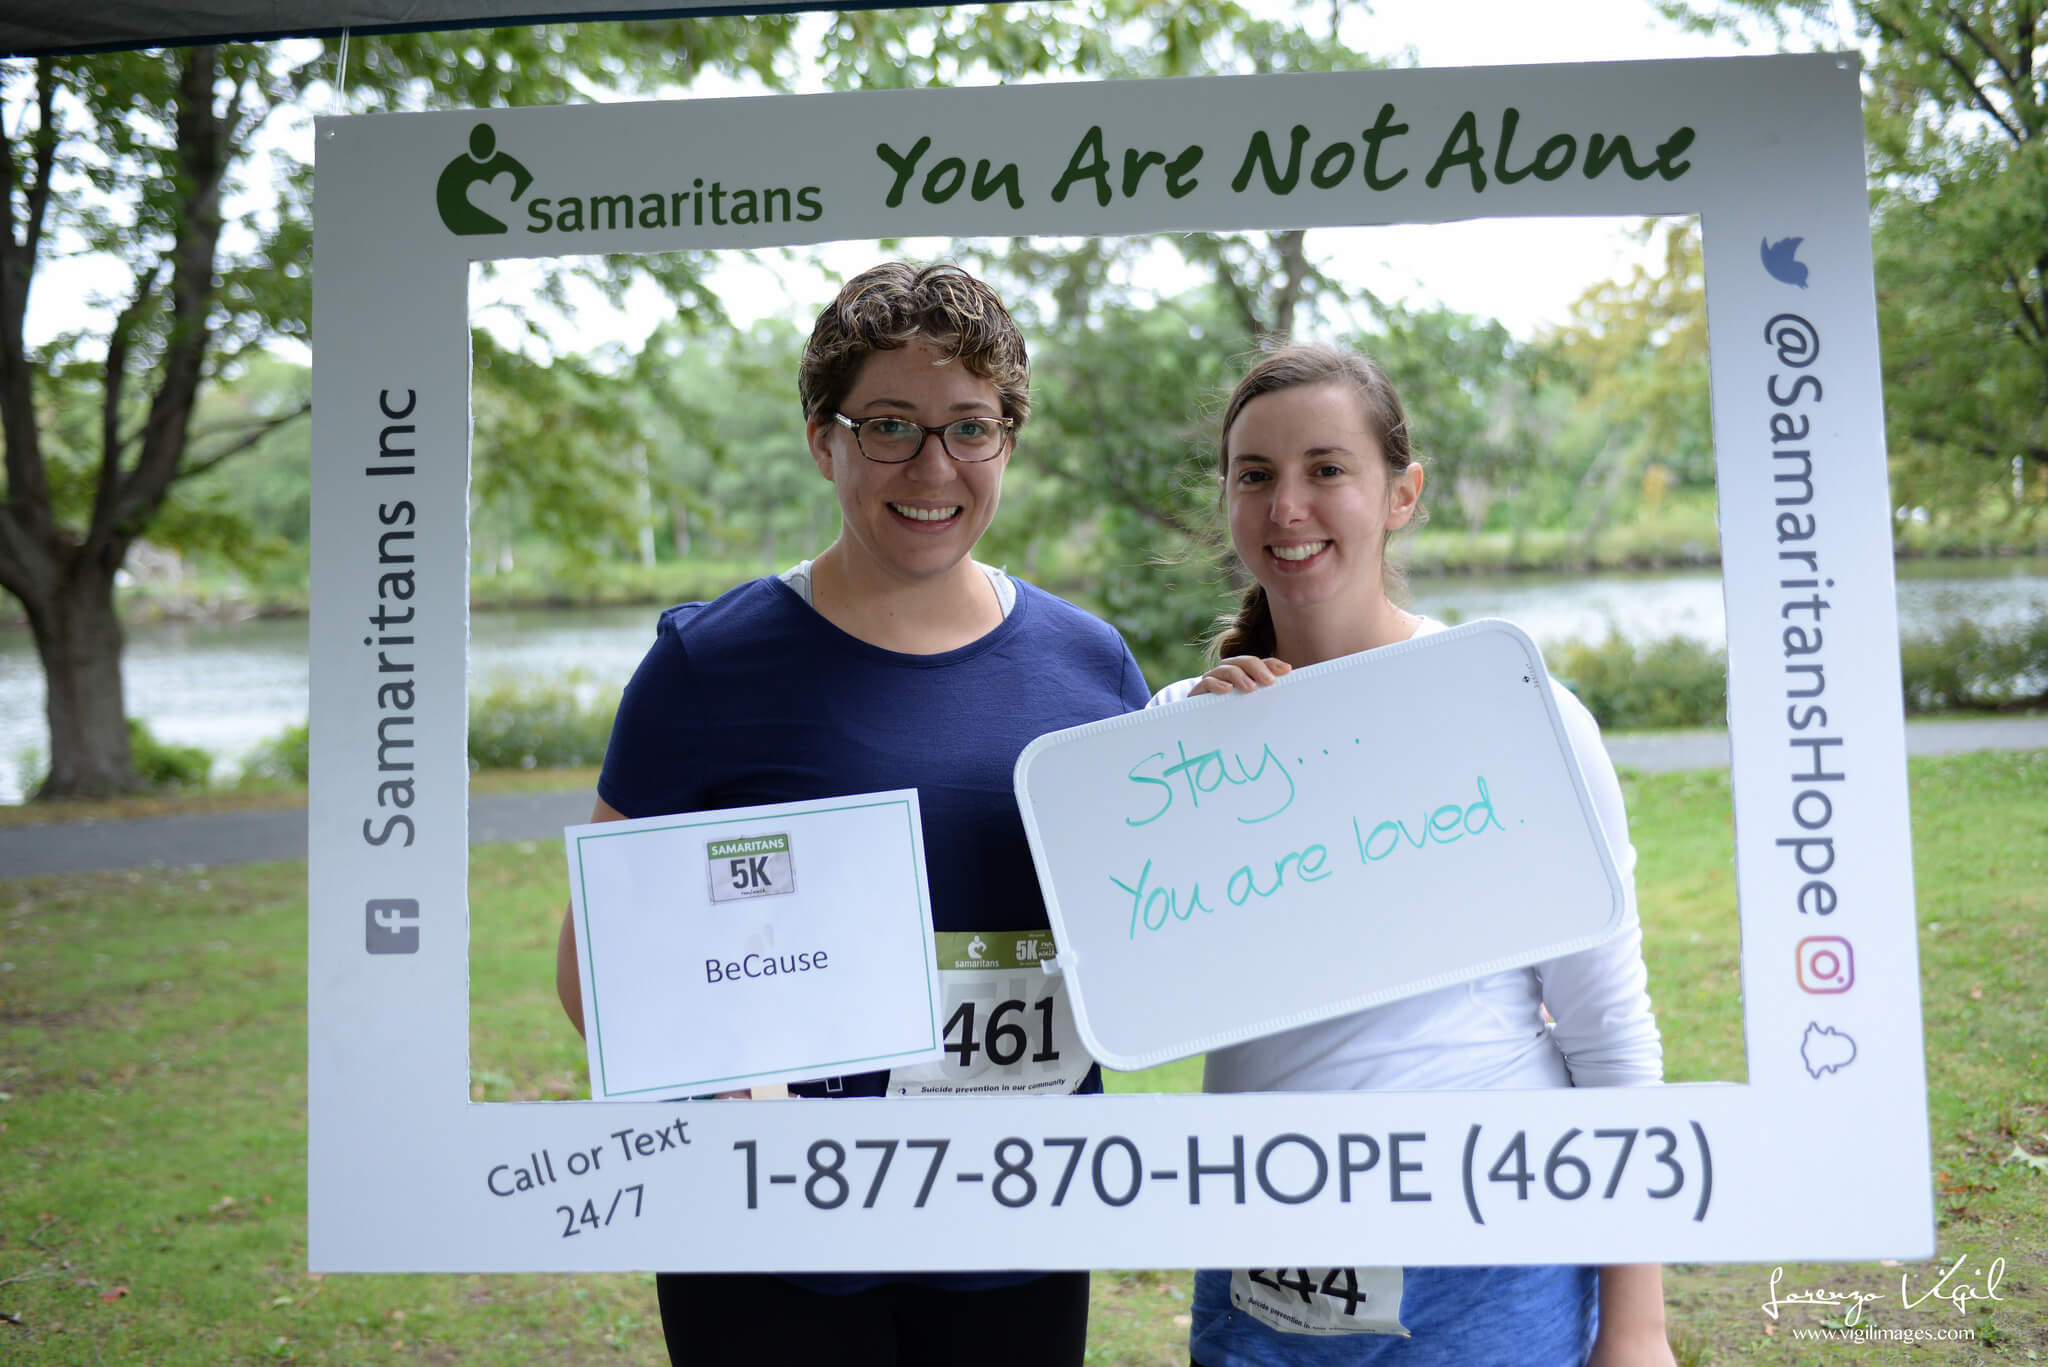 Two people stand behind a white frame with Samaritans contact information at the 2017 annual 5K Run/Walk for Suicide Prevention; they hold their team name, BeCause, and a white board which reads "Stay... you are loved."